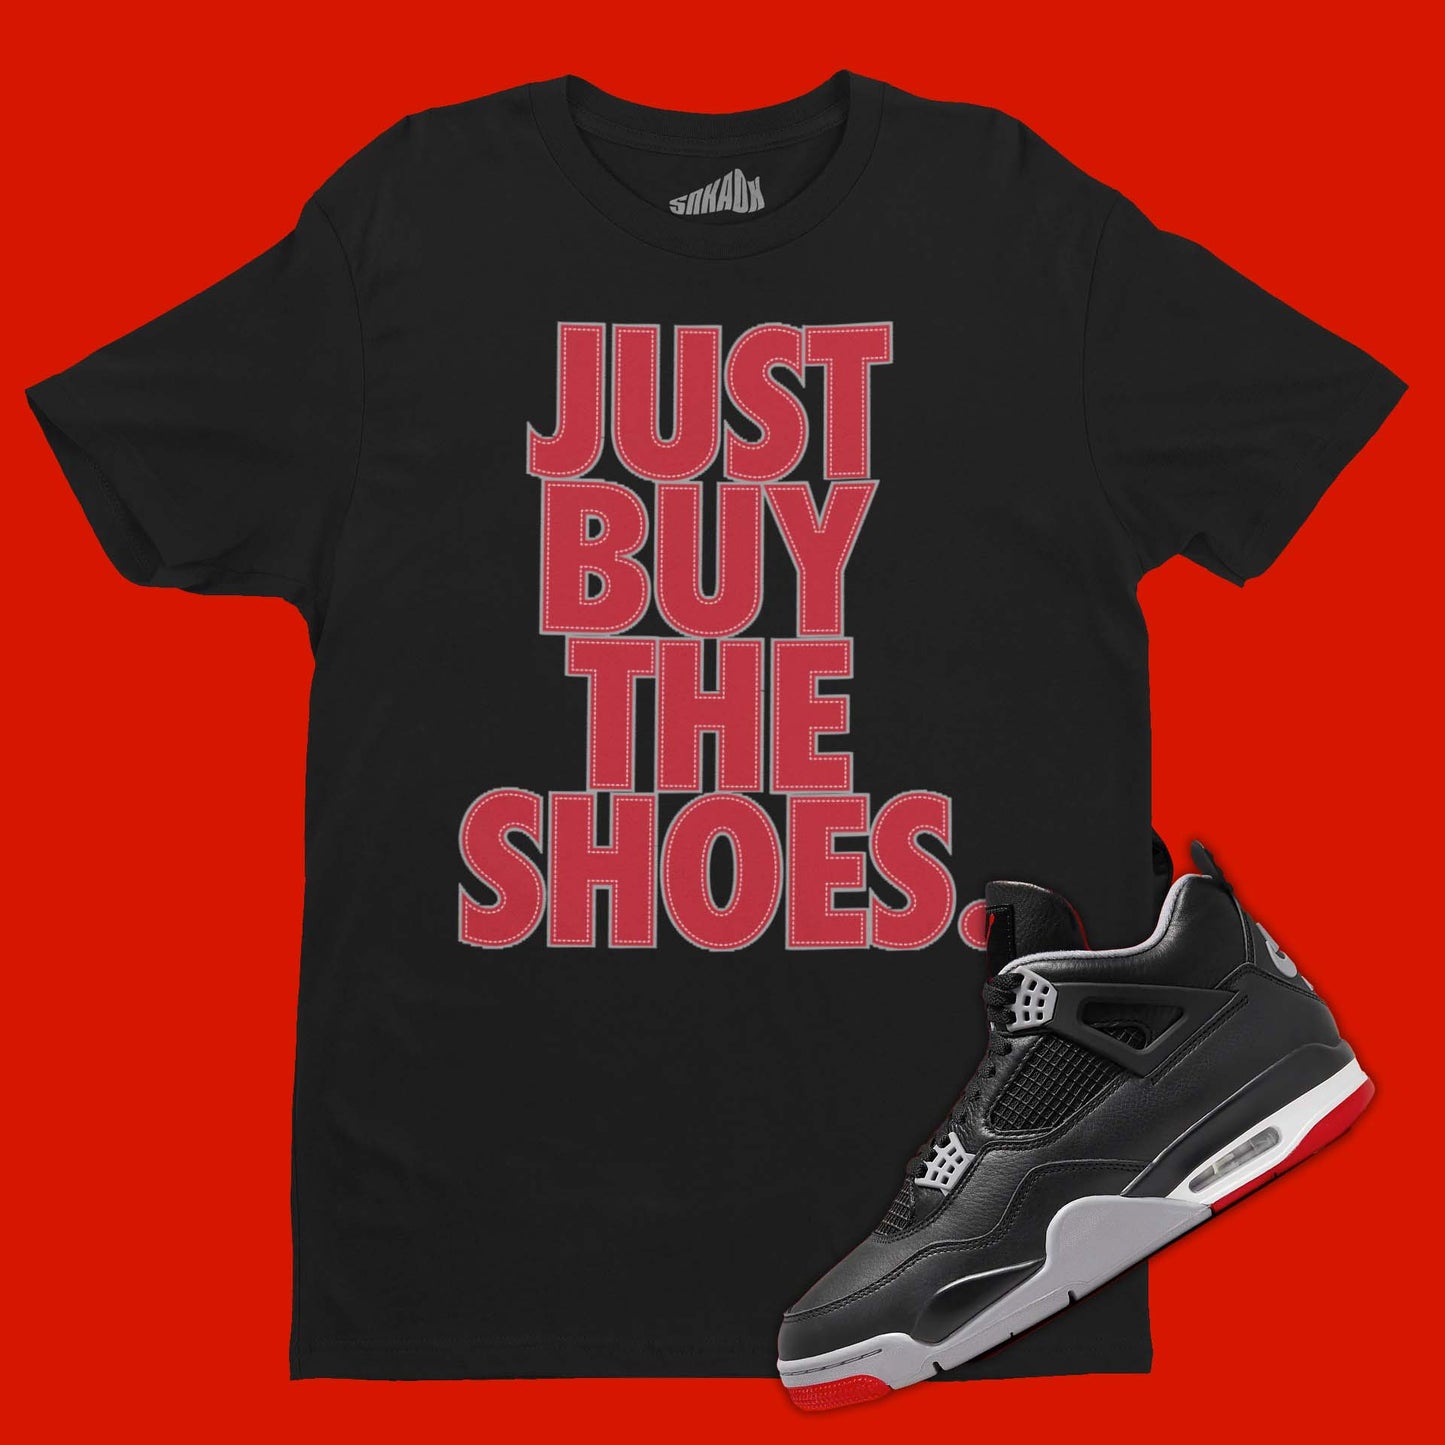 Just Buy The Shoes T-Shirt Matching Air Jordan 4 Bred Reimagined